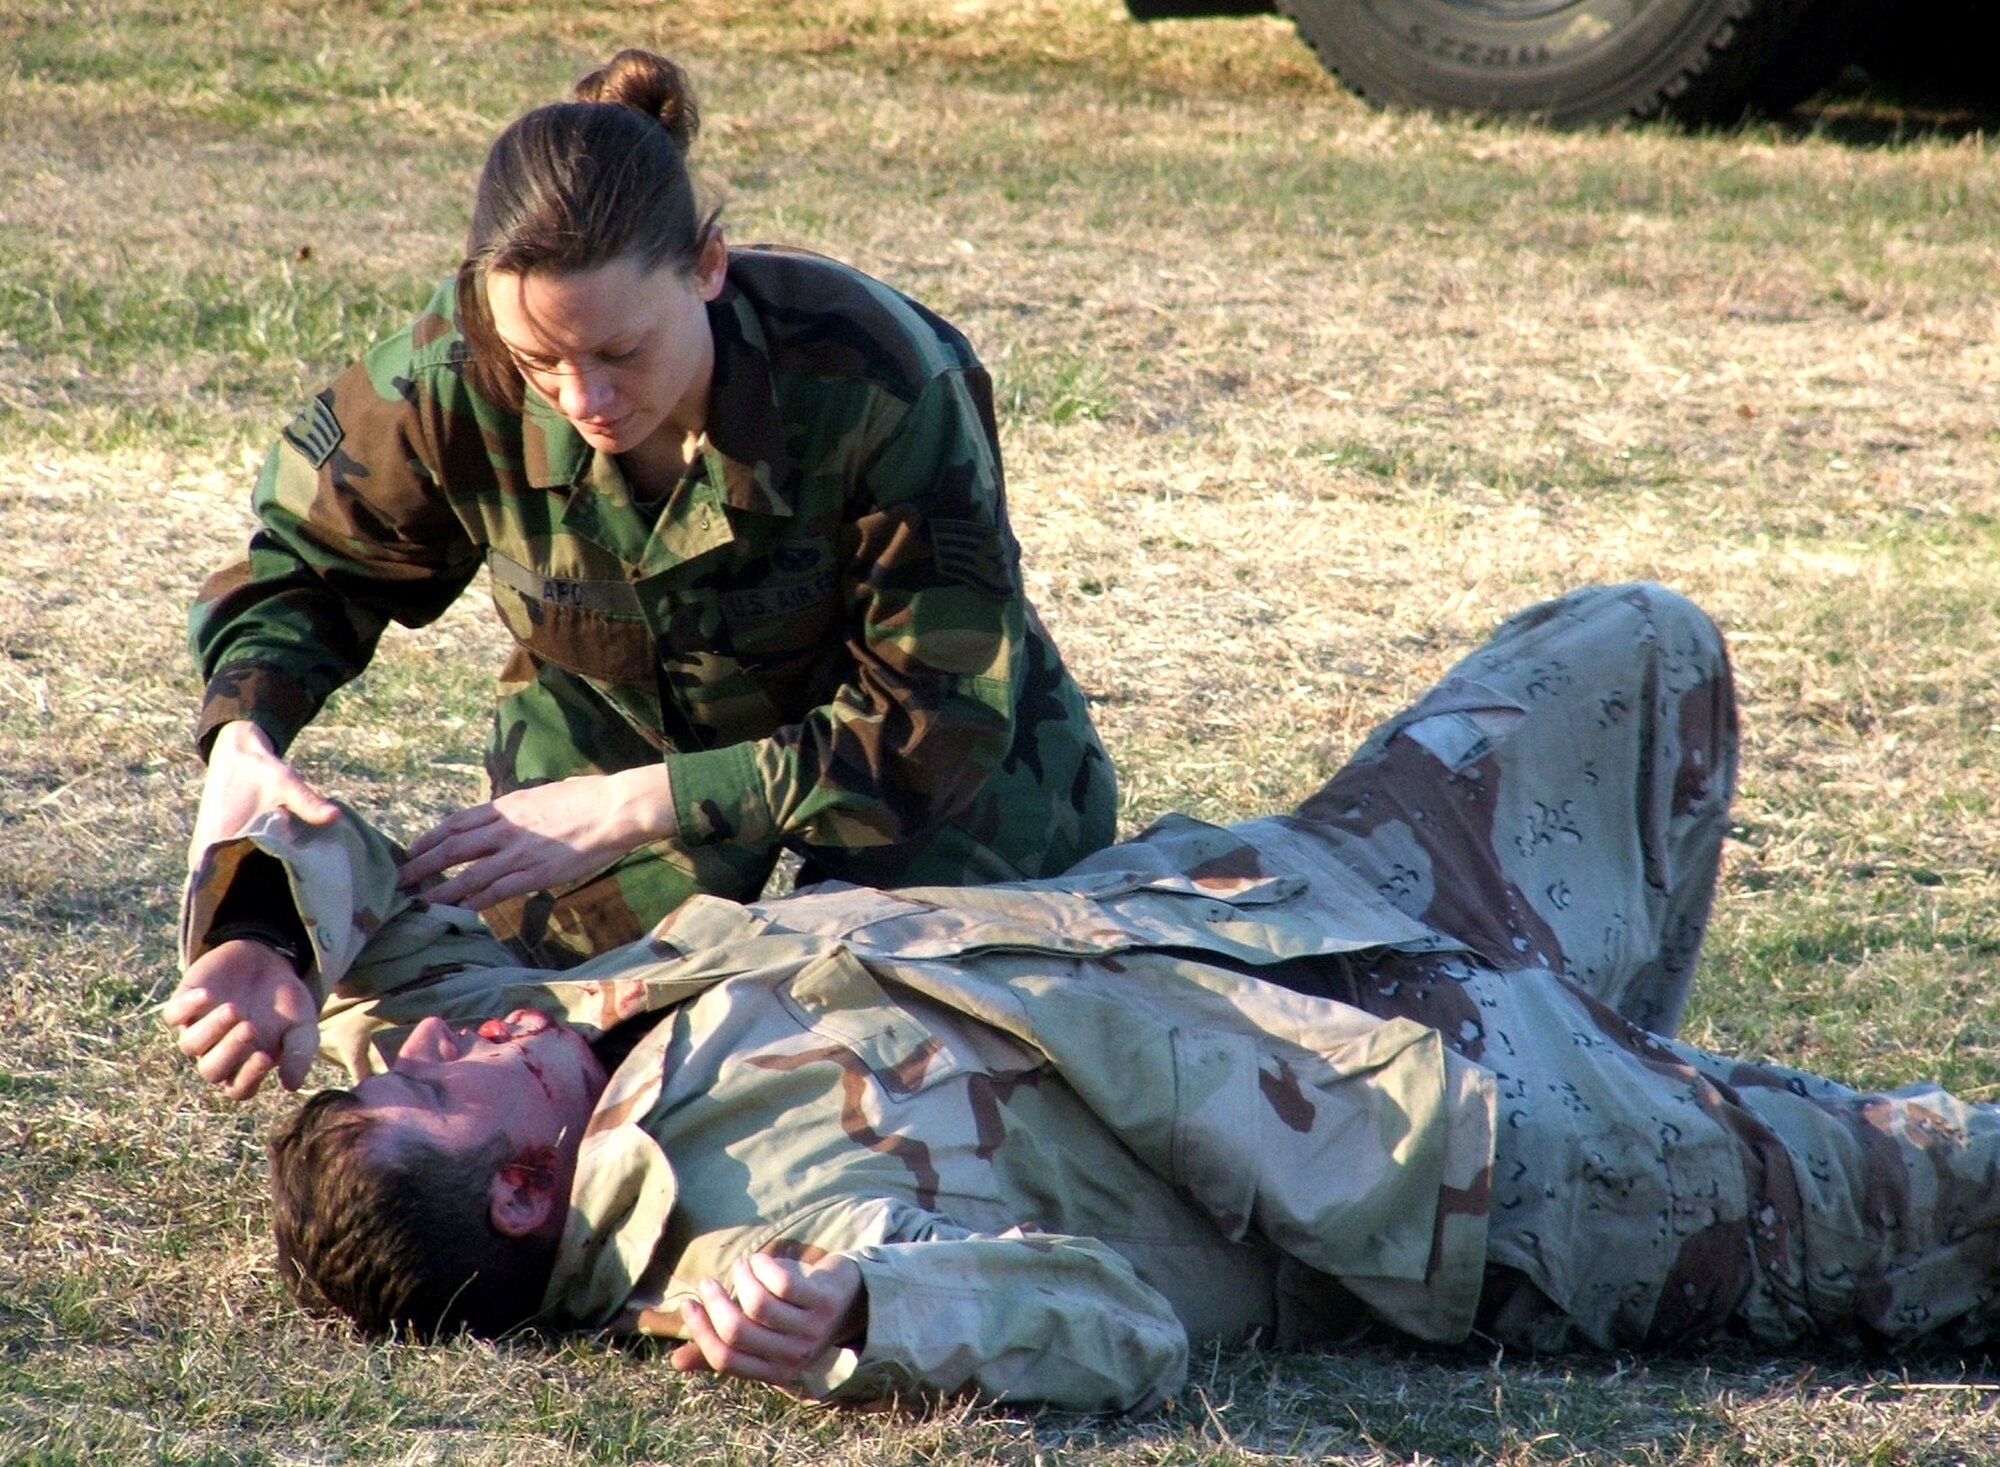 Staff Sgt. April Apo assists a "victim" injured by a simulated "bomb" during combat first aid training at the Air Force Phoenix Raven Course 06-D, on Monday, March 27, 2006.  She is one of 24 students attending the course taught by the Air Mobility Warfare Center's 421st Combat Training Squadron.  Sergeant Apo is with the Nevada Air National Guards 152nd Security Forces Squadron at Reno-Tahoe International Airport, Nev. (U.S. Air Force photo/Tech. Sgt. Scott T. Sturkol)